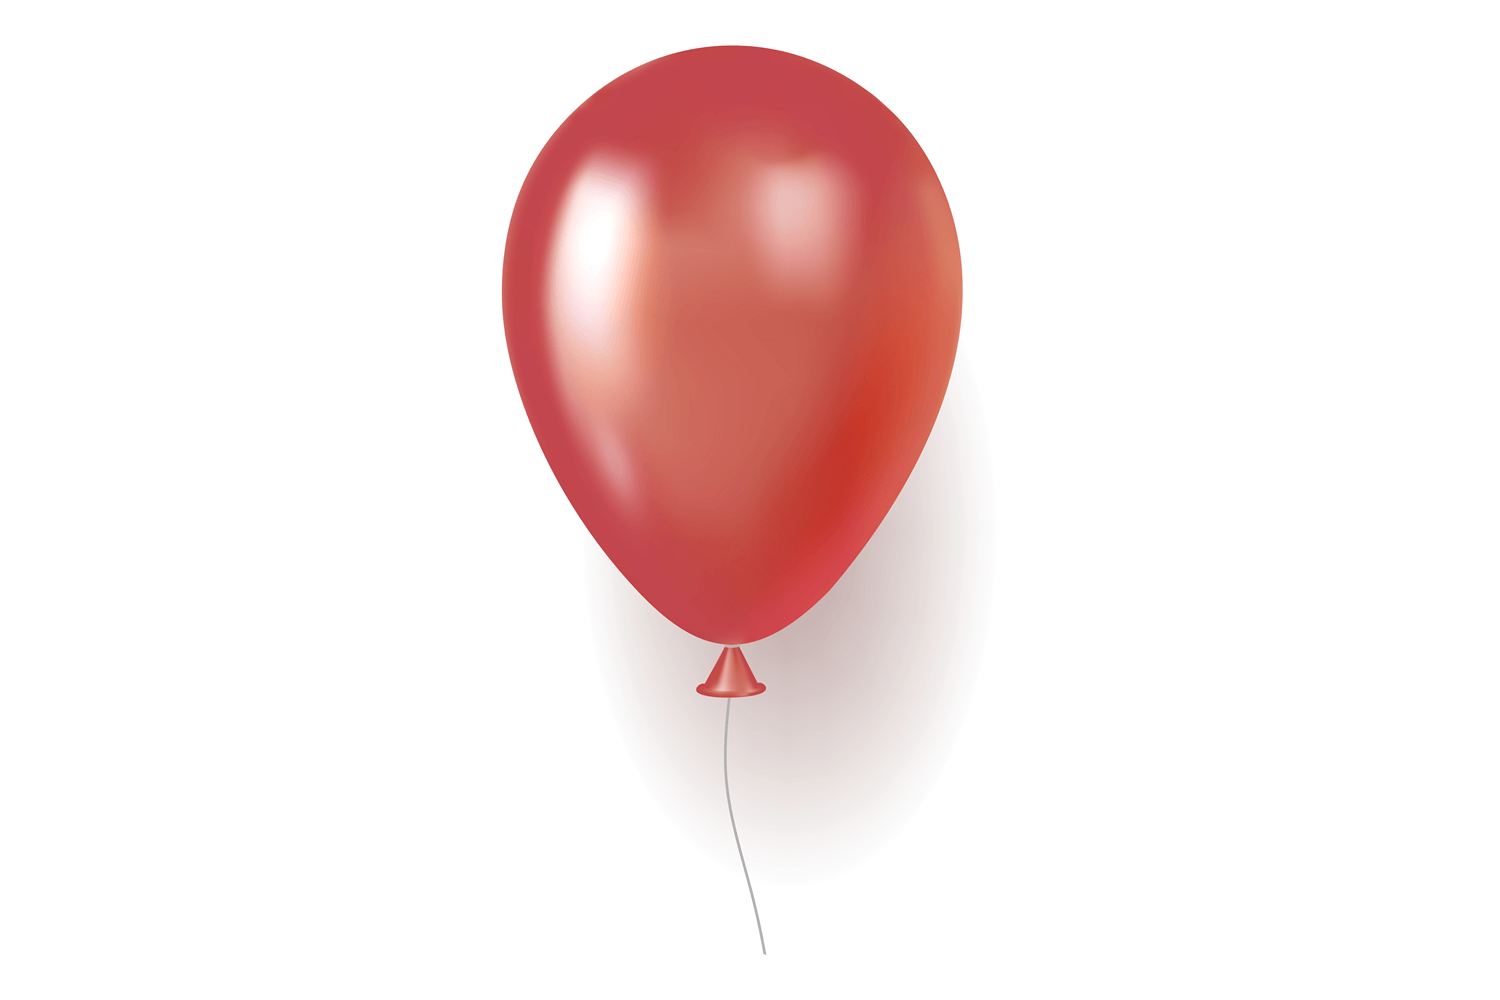 Party Red Balloon Sticker Vector Graphic by holycatart · Creative